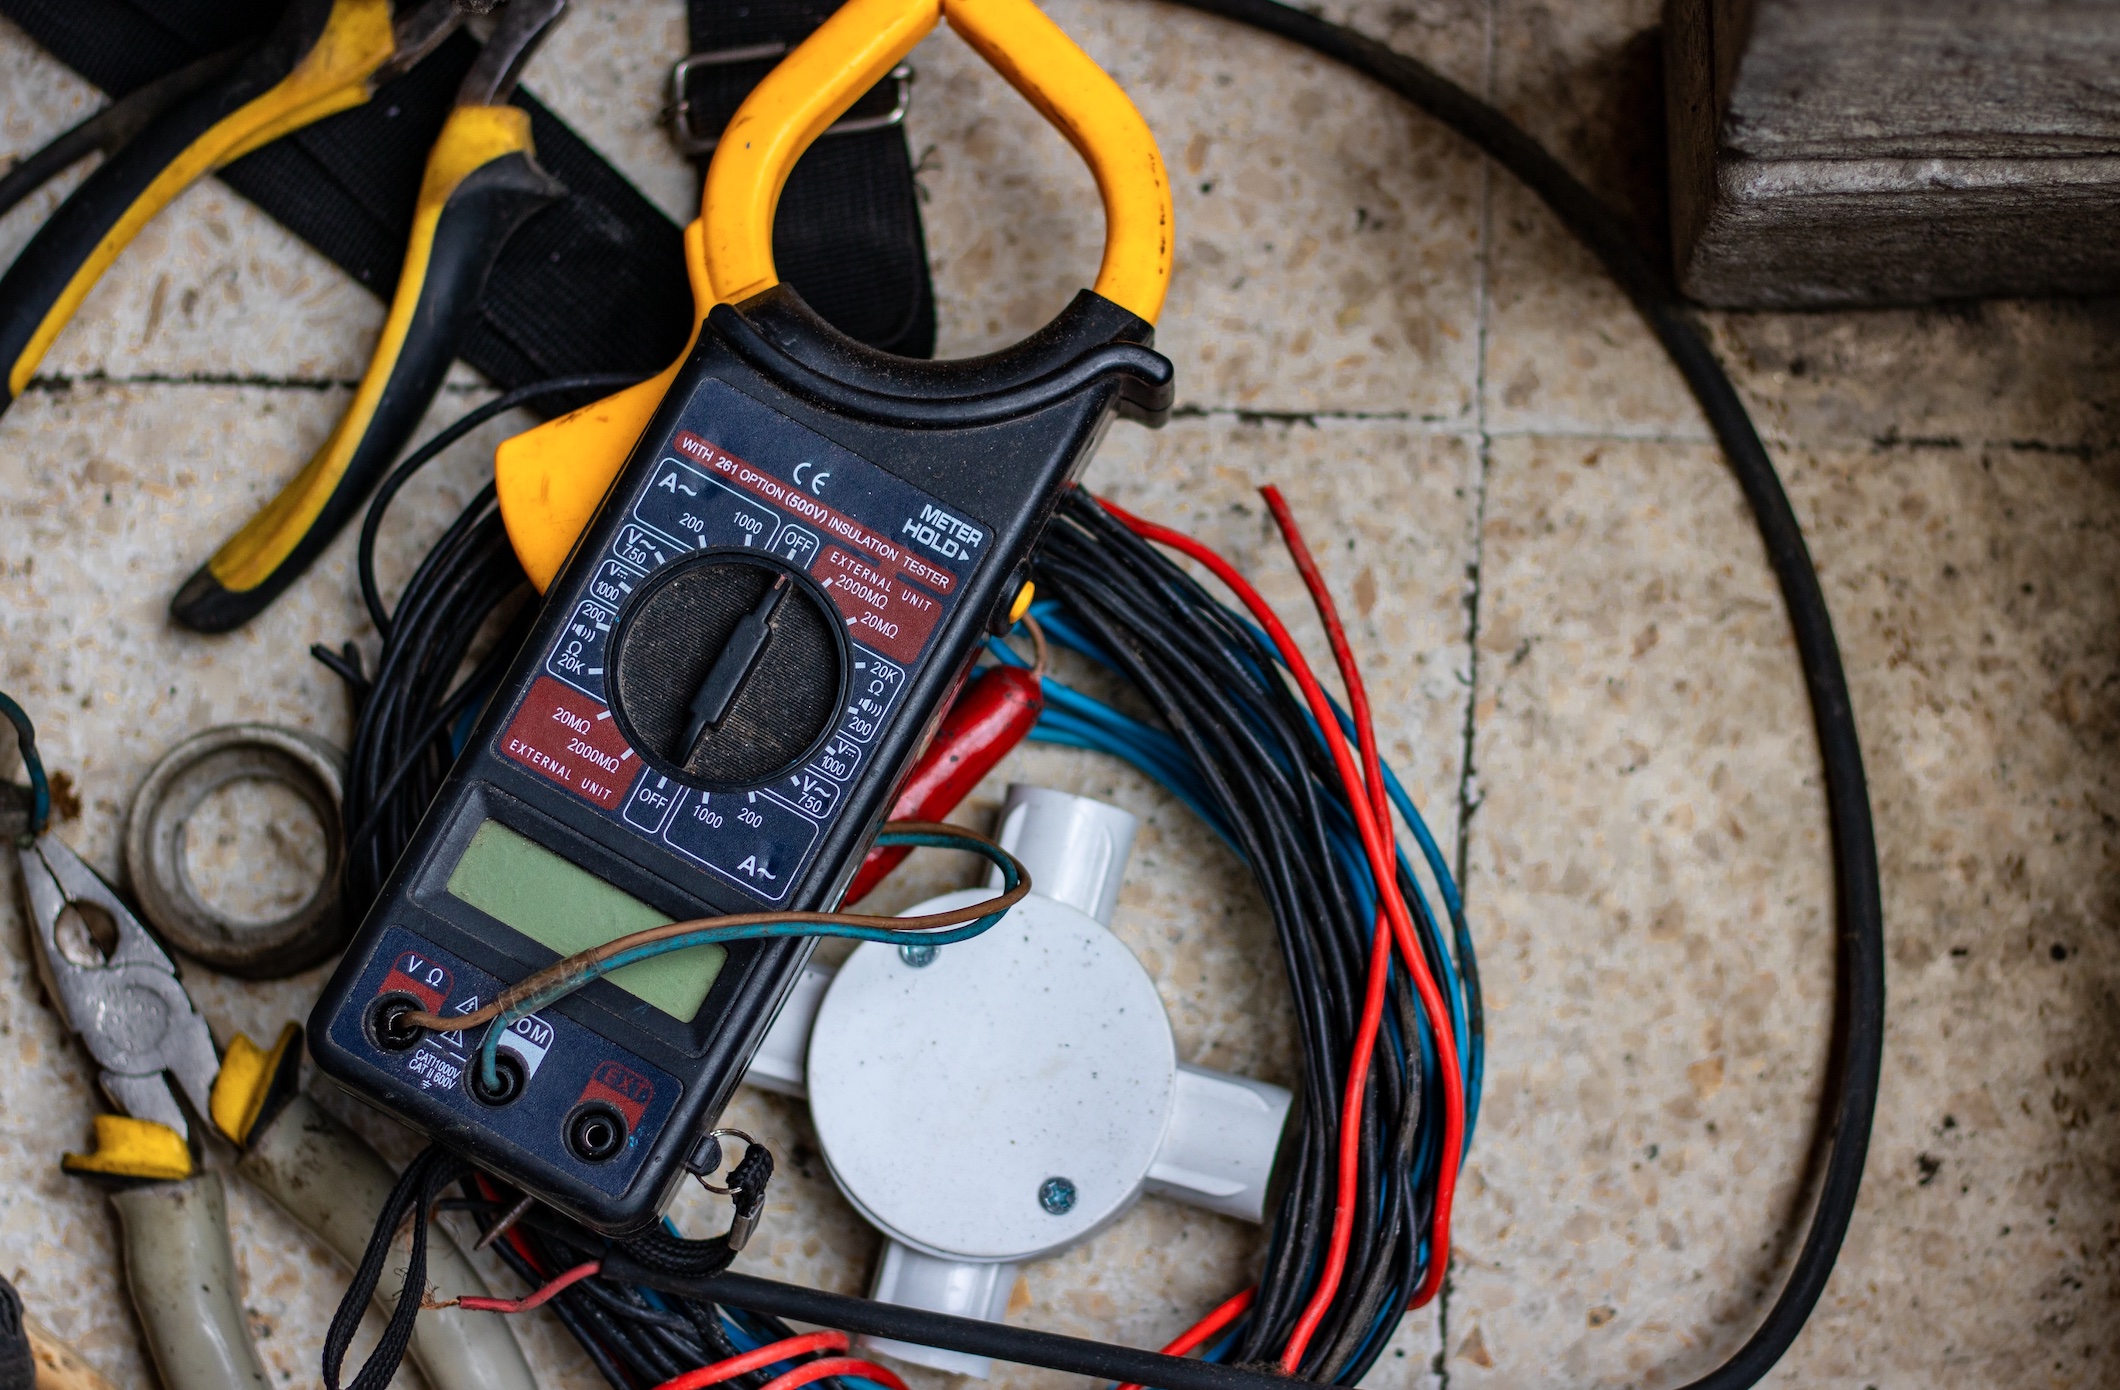 Electric clamp meter and wires; image by Hobi Industri, via Unsplash.com.